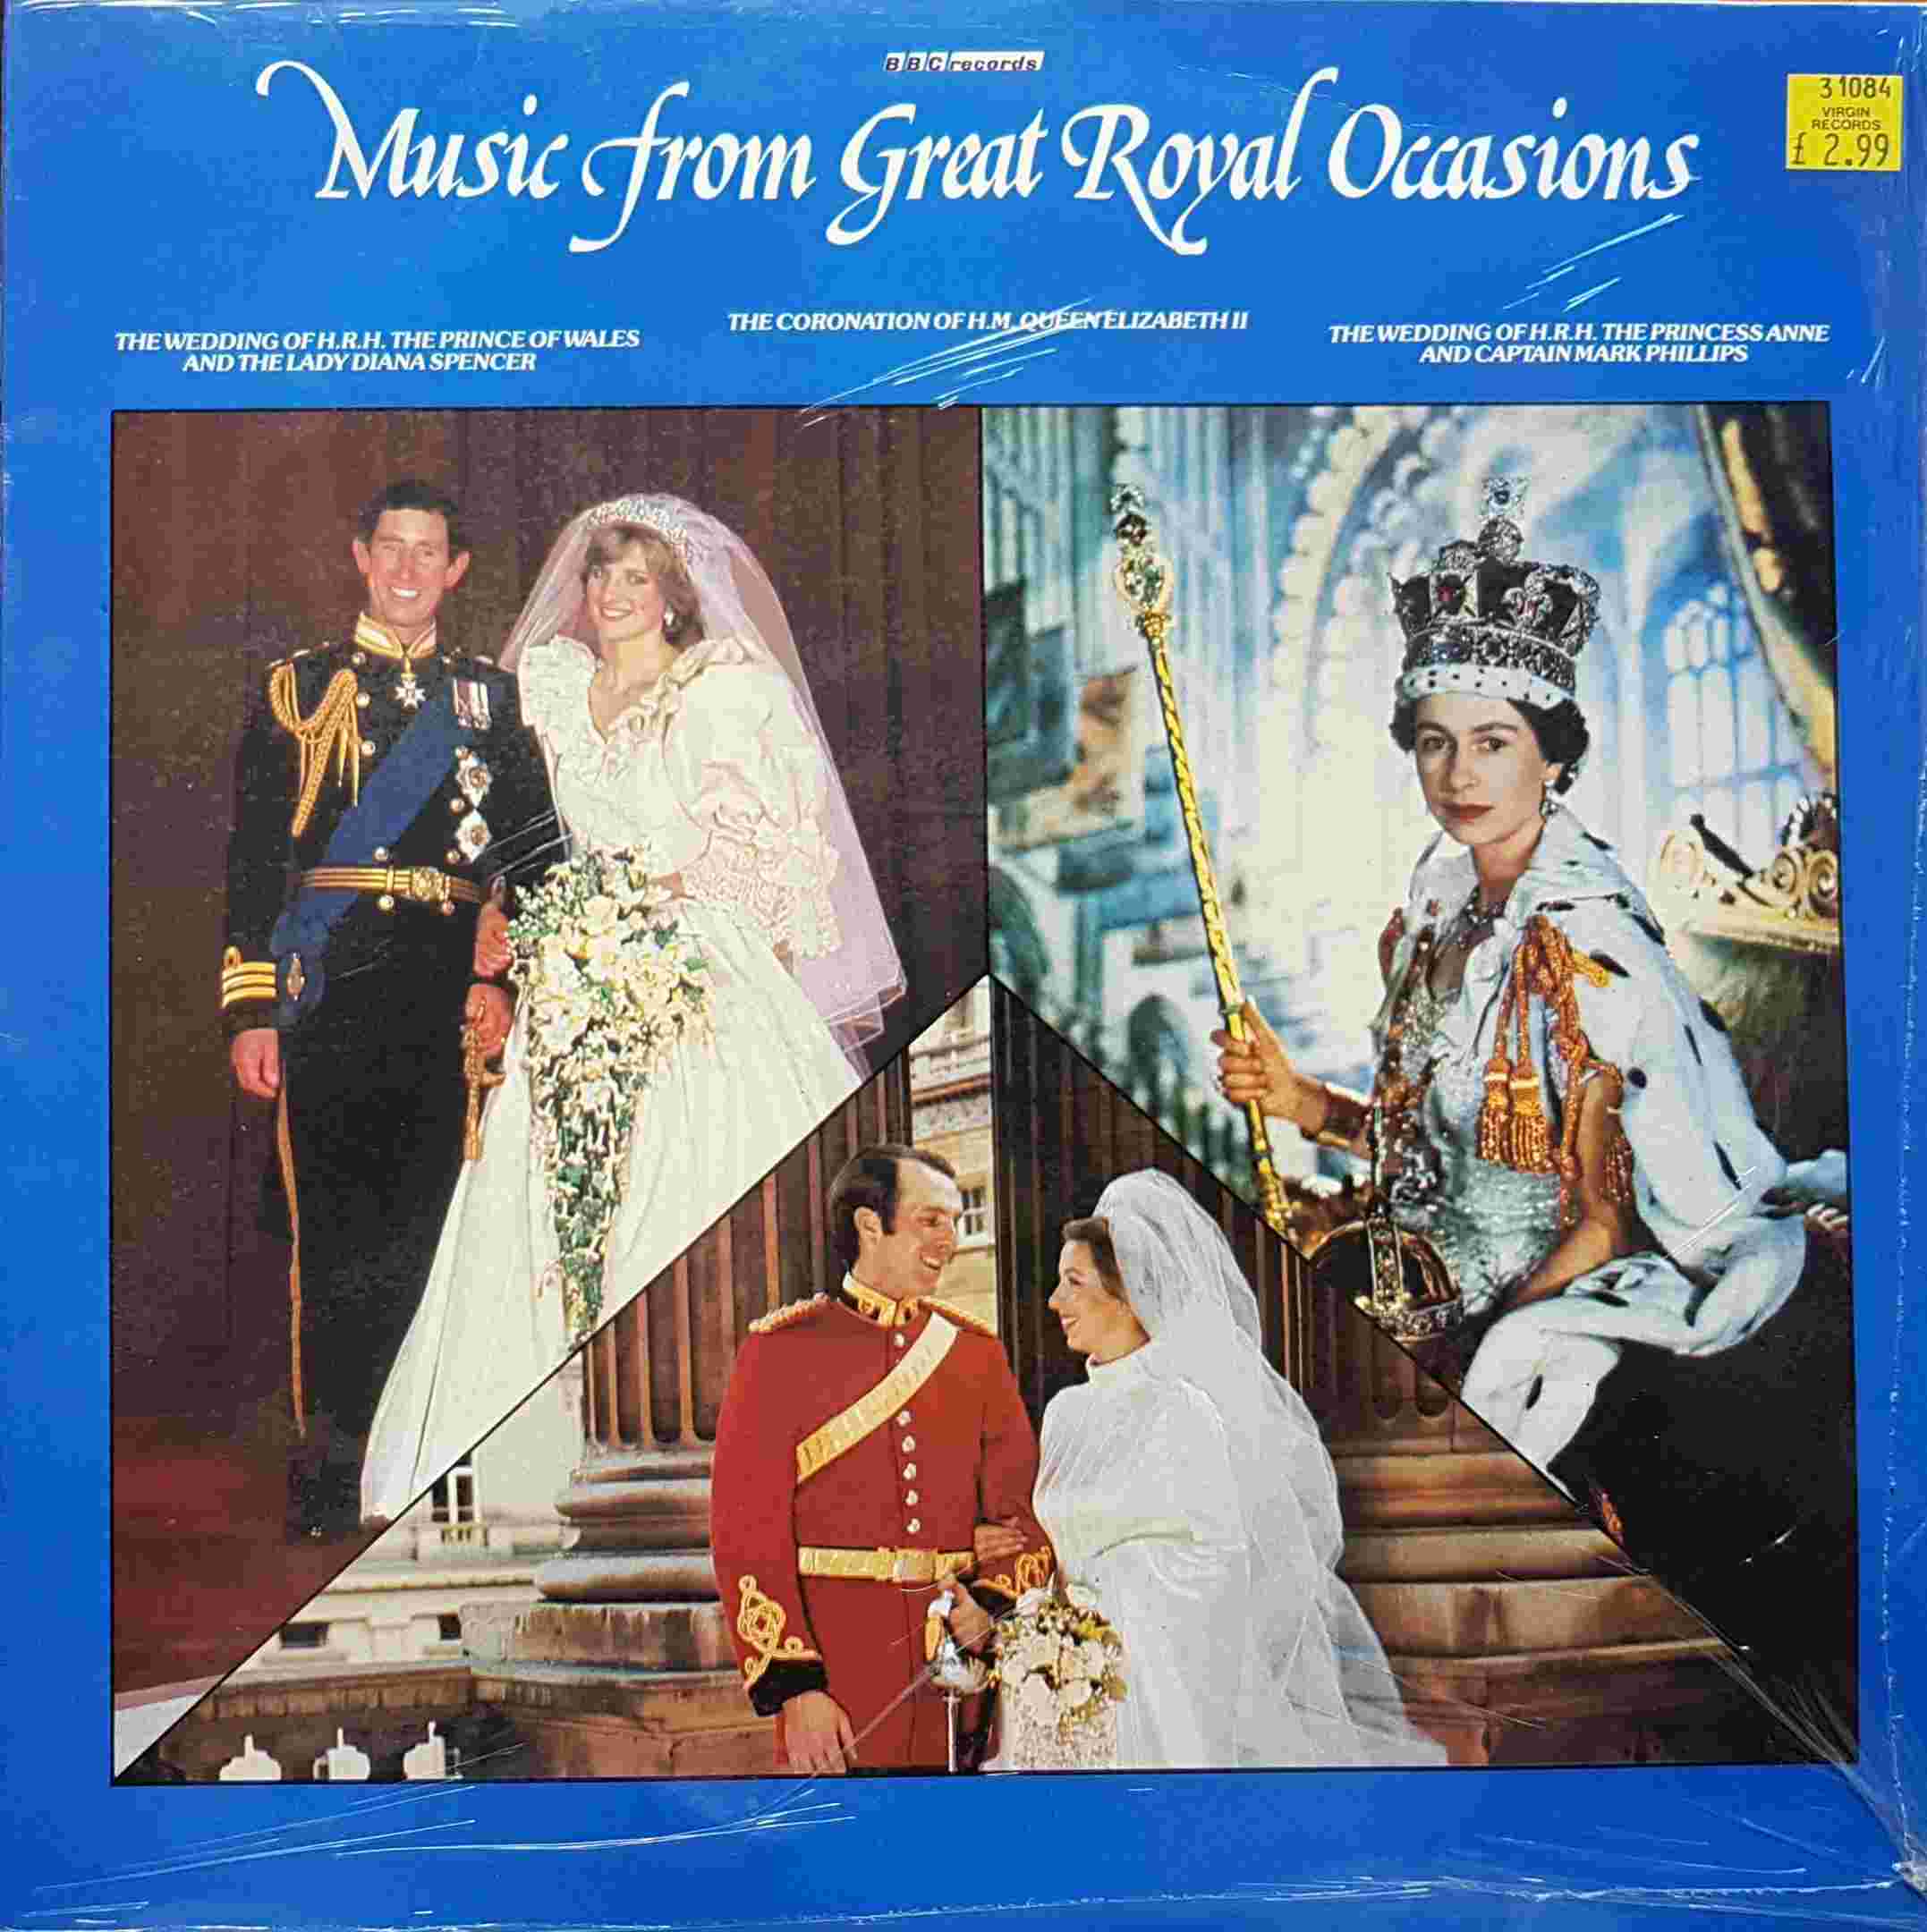 Picture of REC 470 Music from great royal occasions (Includes BBC info sheet) by artist Various from the BBC albums - Records and Tapes library